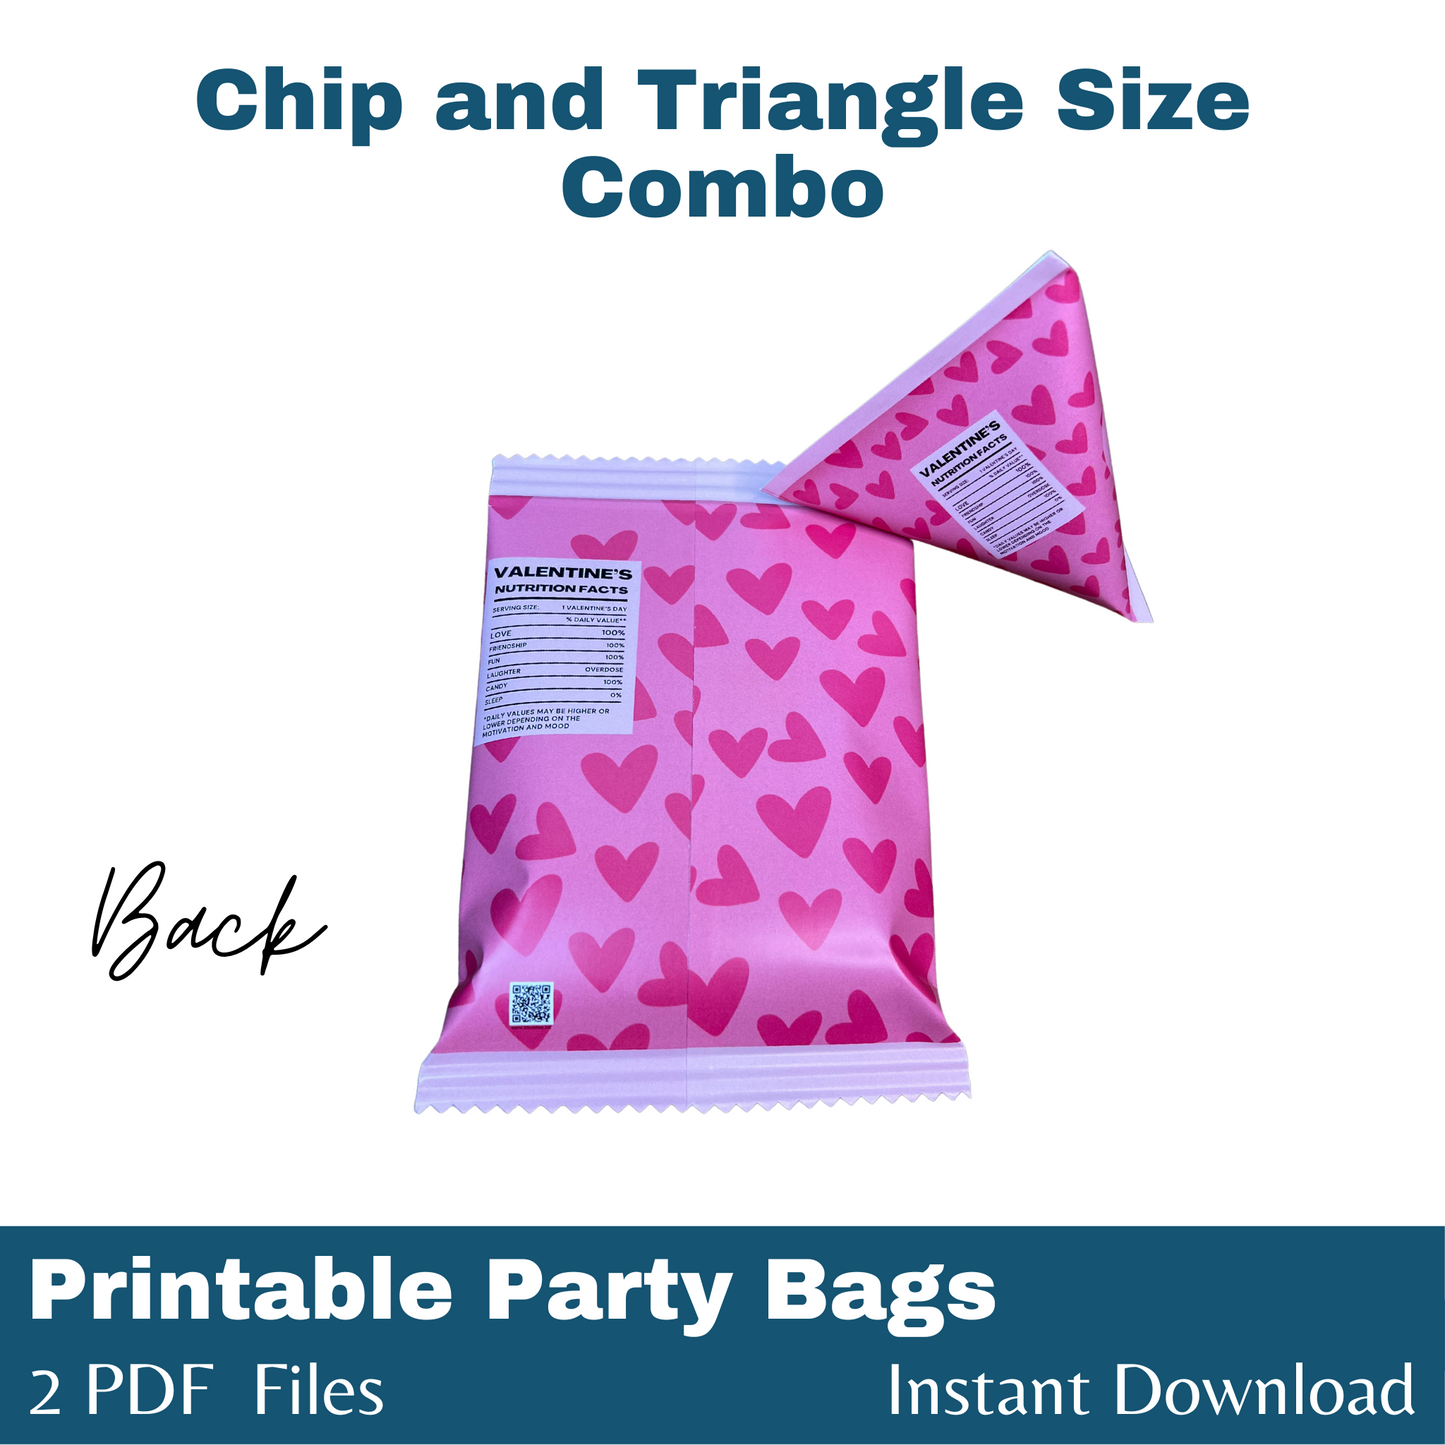 Pink Valentine's Party Bag Combo